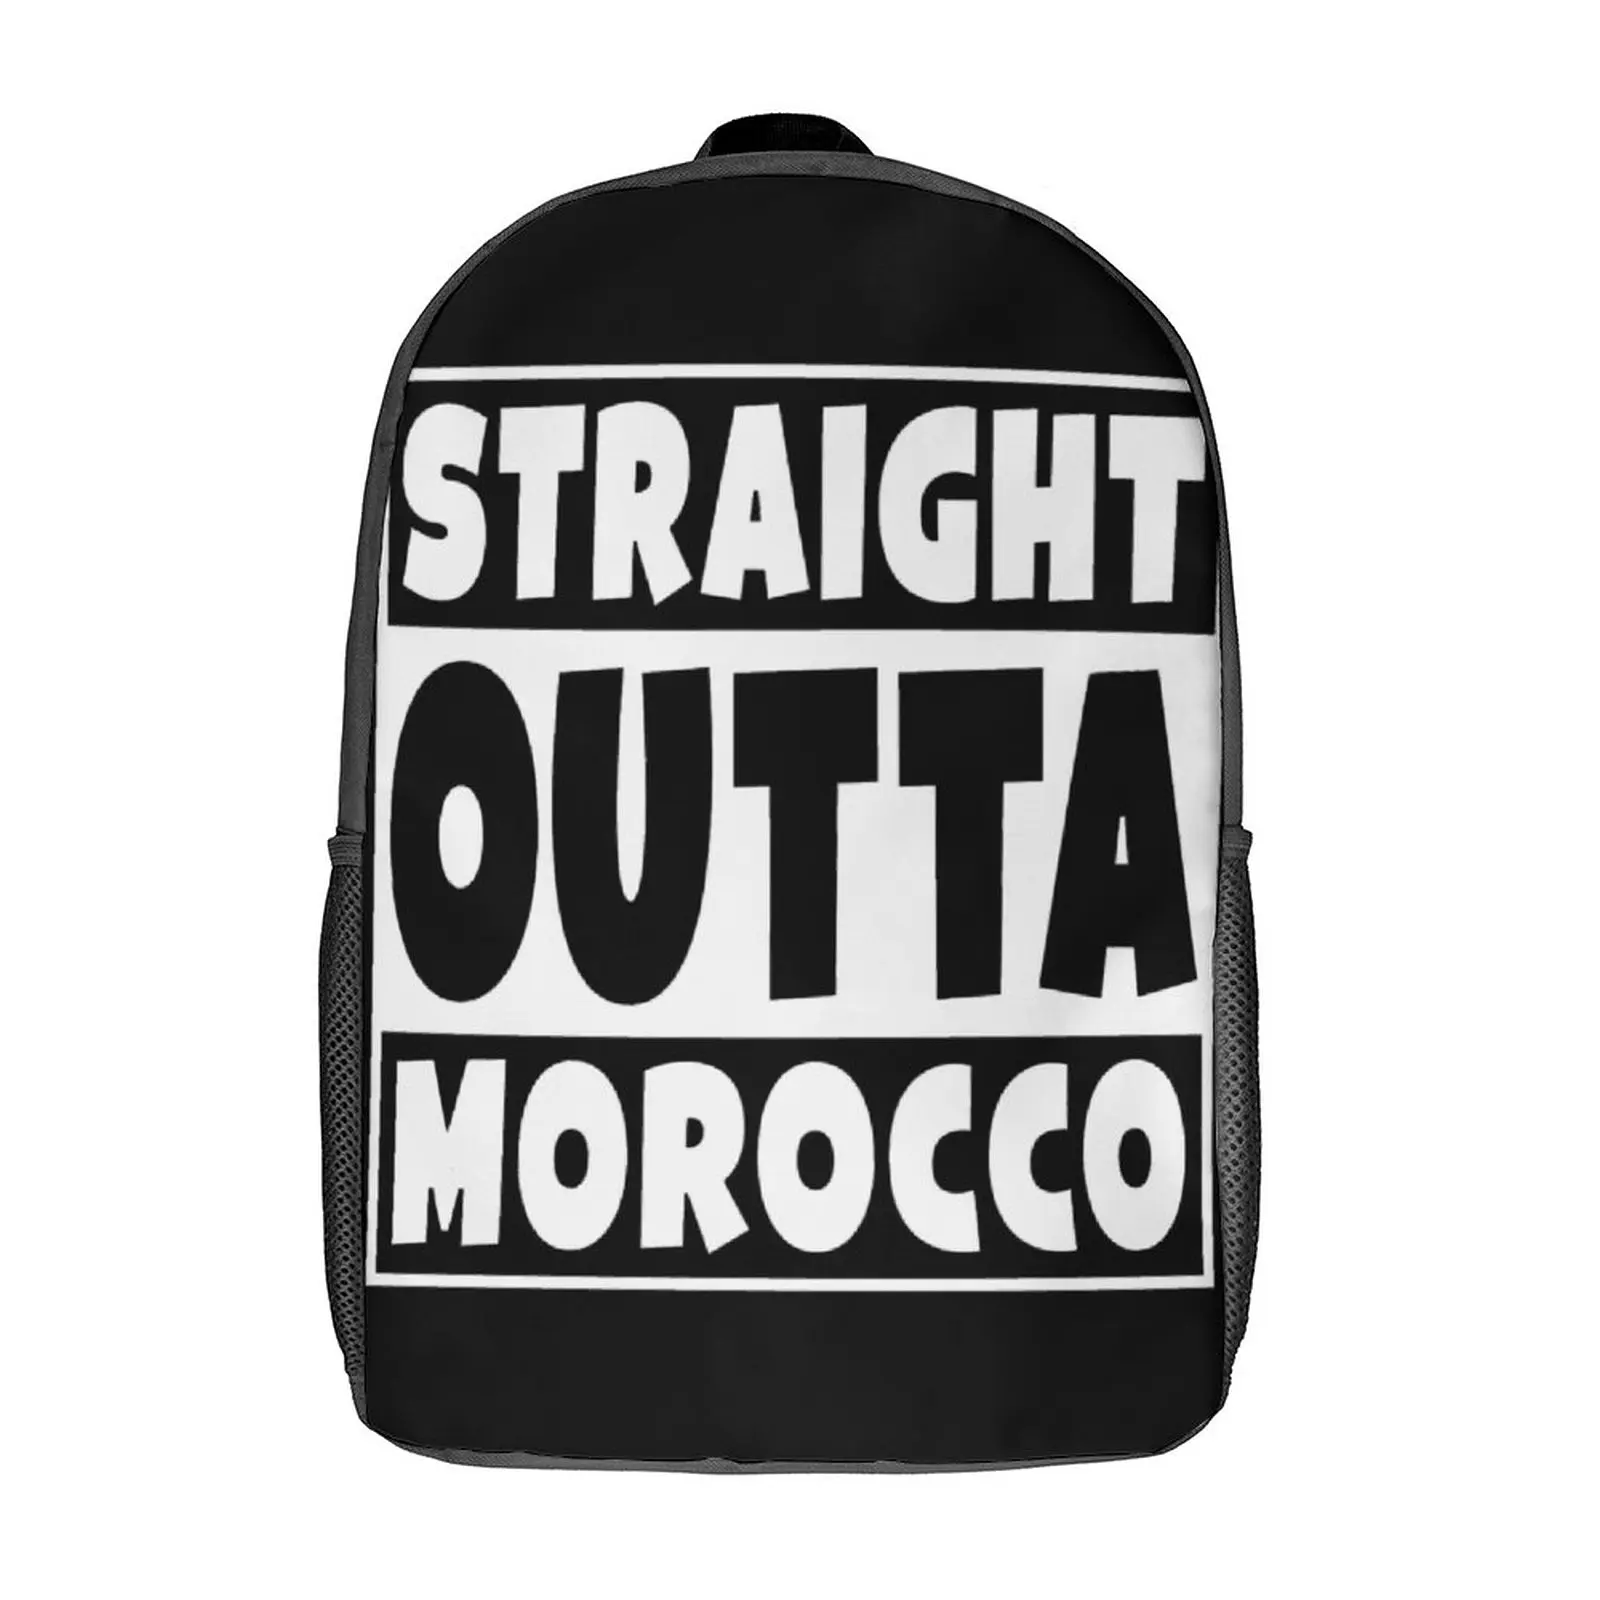 

Straight Outta Morocco Morocco G Durable Snug Knapsack17 Inch Shoulder Backpack Vintage Sports Activities Top Quality